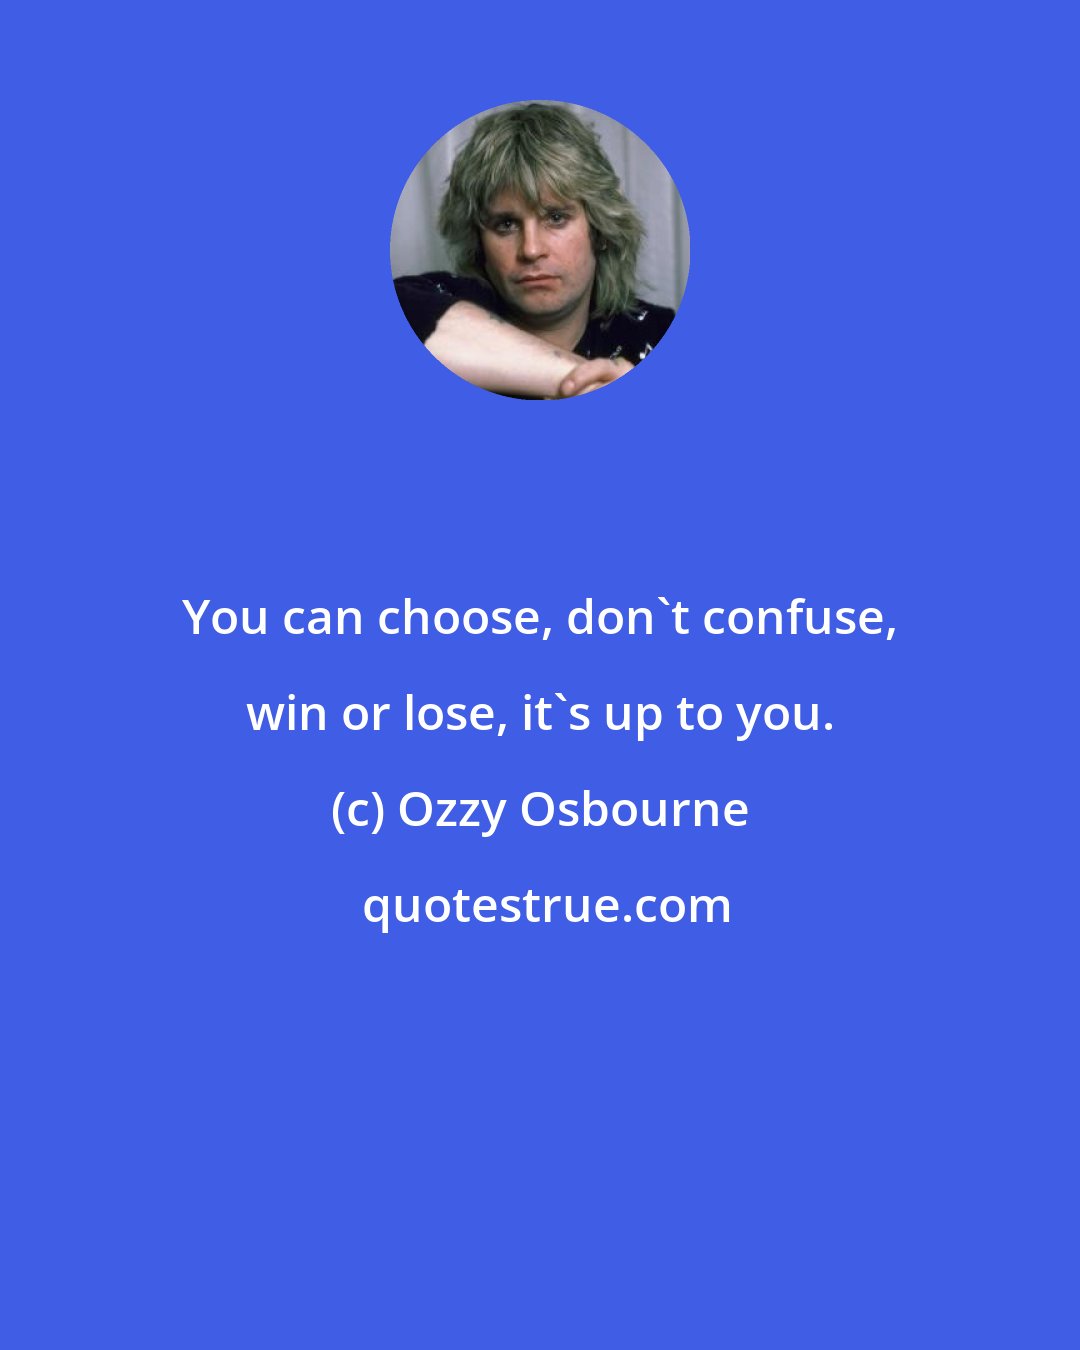 Ozzy Osbourne: You can choose, don't confuse, win or lose, it's up to you.